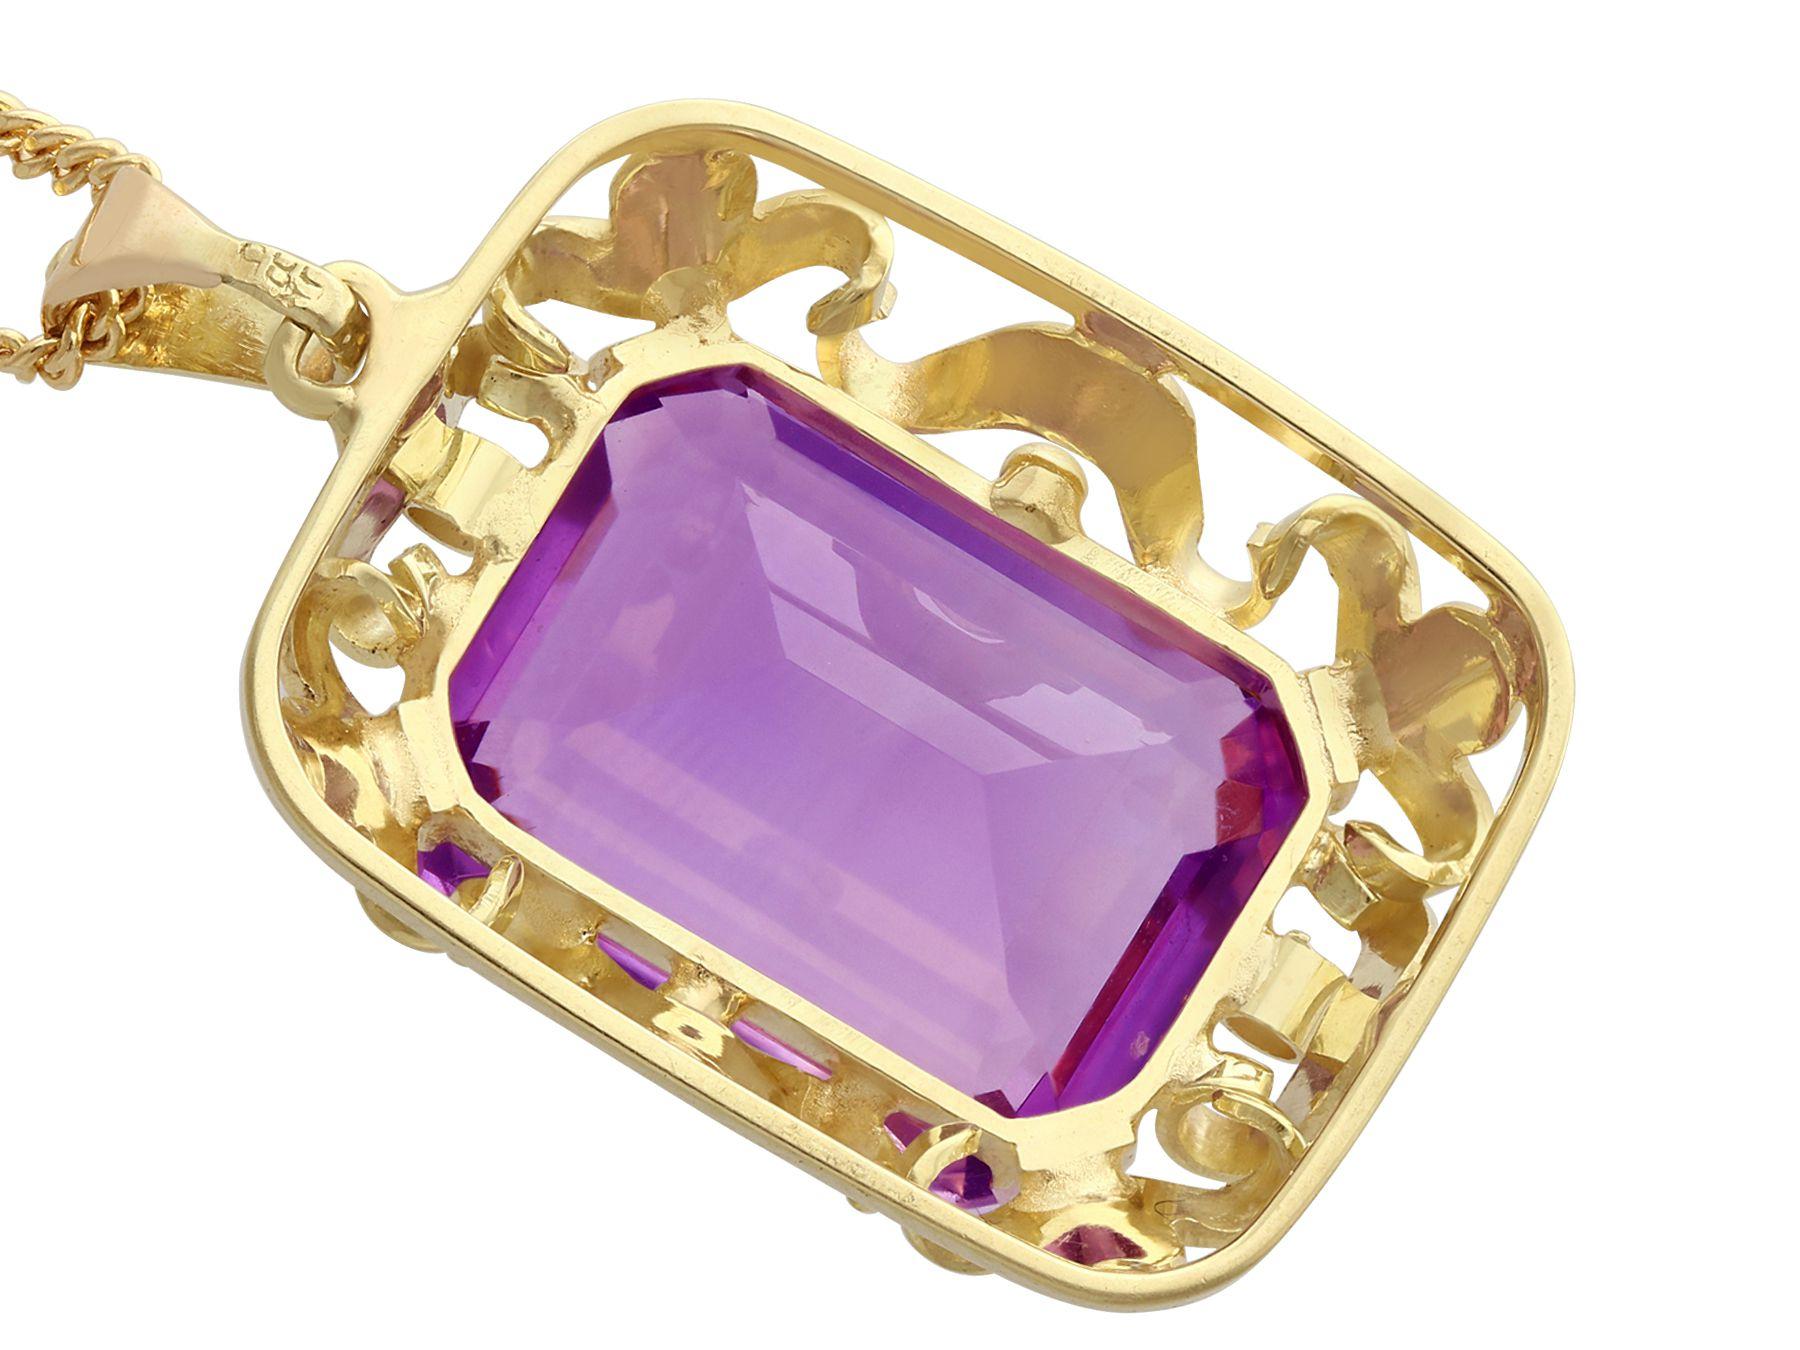 Women's Vintage 1950s 15.41 Carat Amethyst and Yellow Gold Pendant For Sale